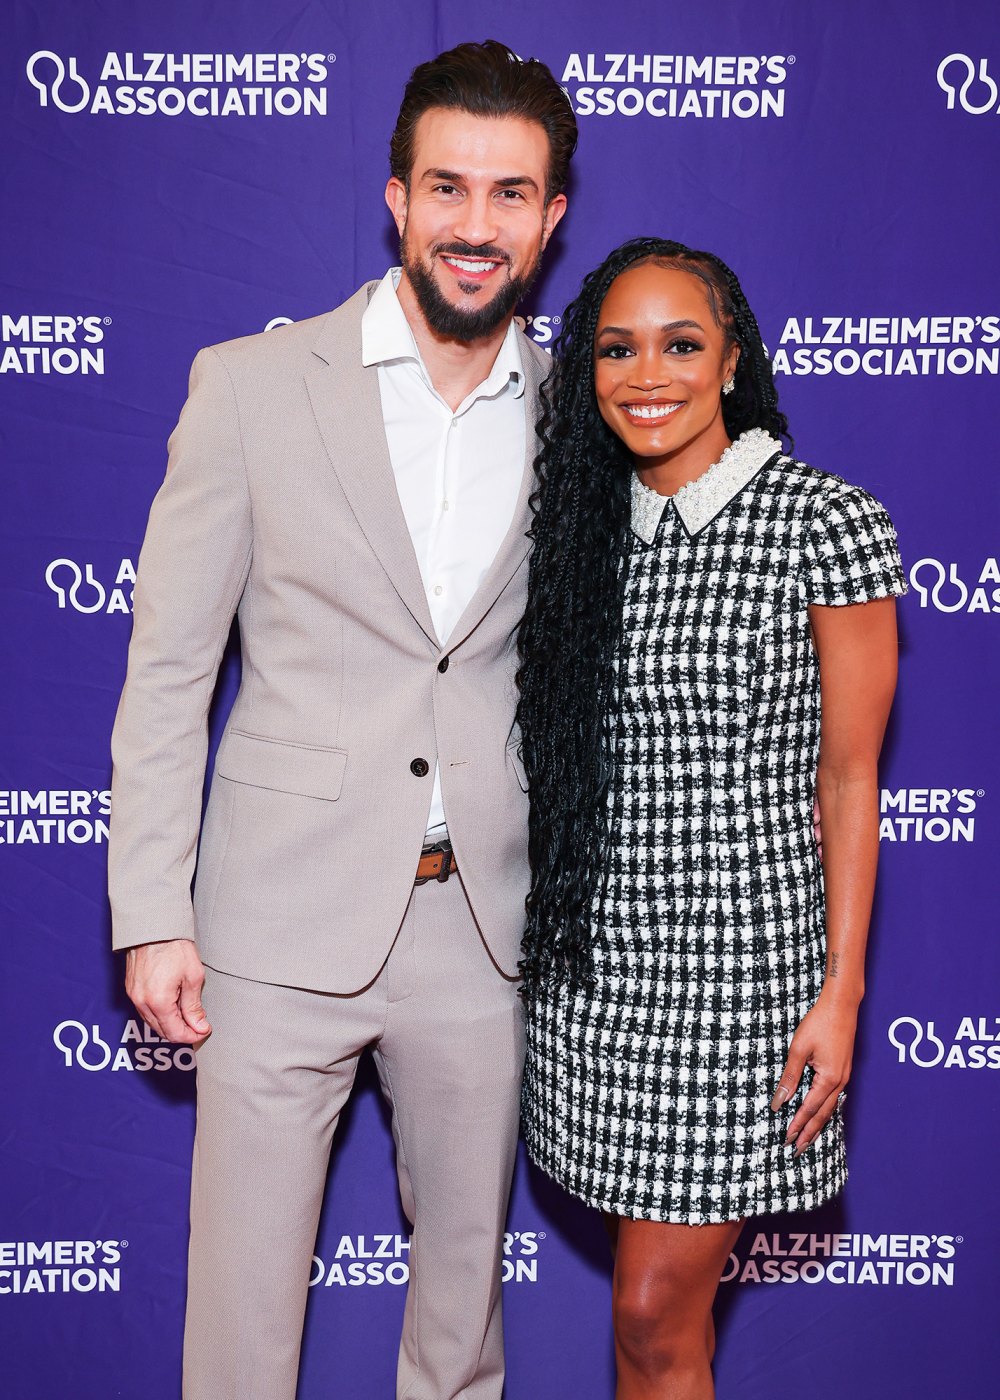 Rachel Lindsay Doesn't Want to 'Date for Potential,' Needs 'Ambitious' Man After Bryan Abasolo Split